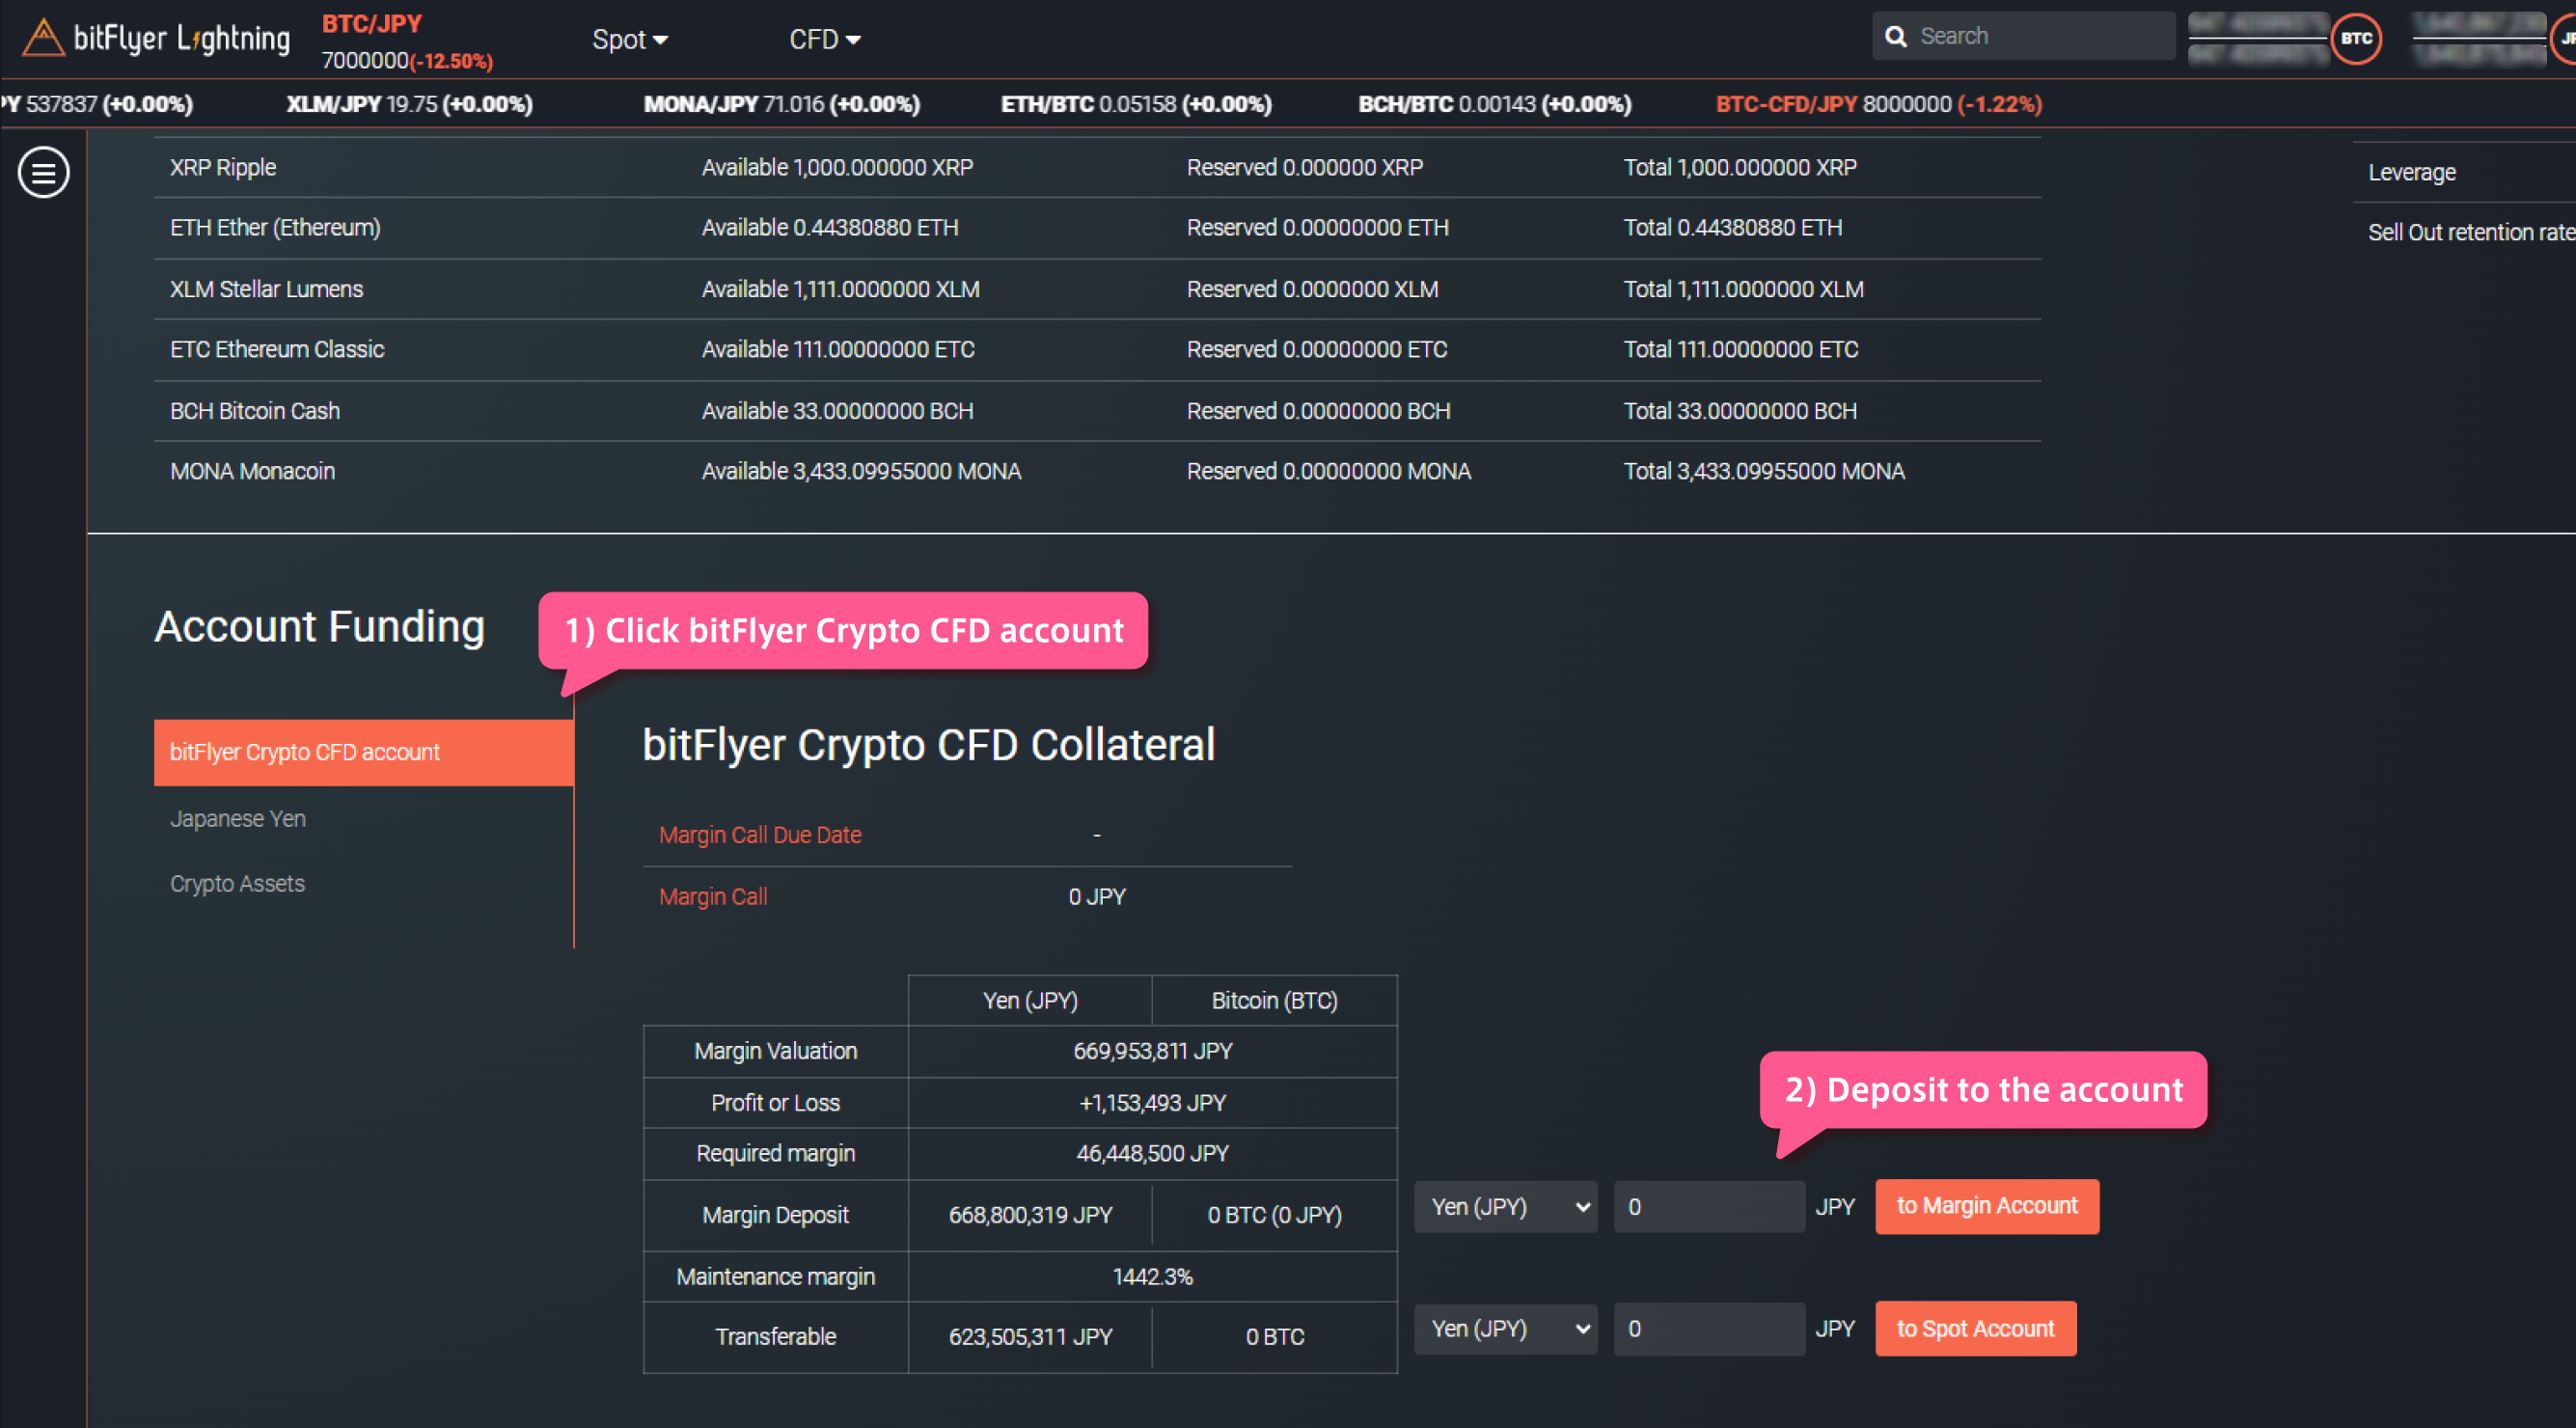 Click bitFlyer Crypto CFD account to make deposits.